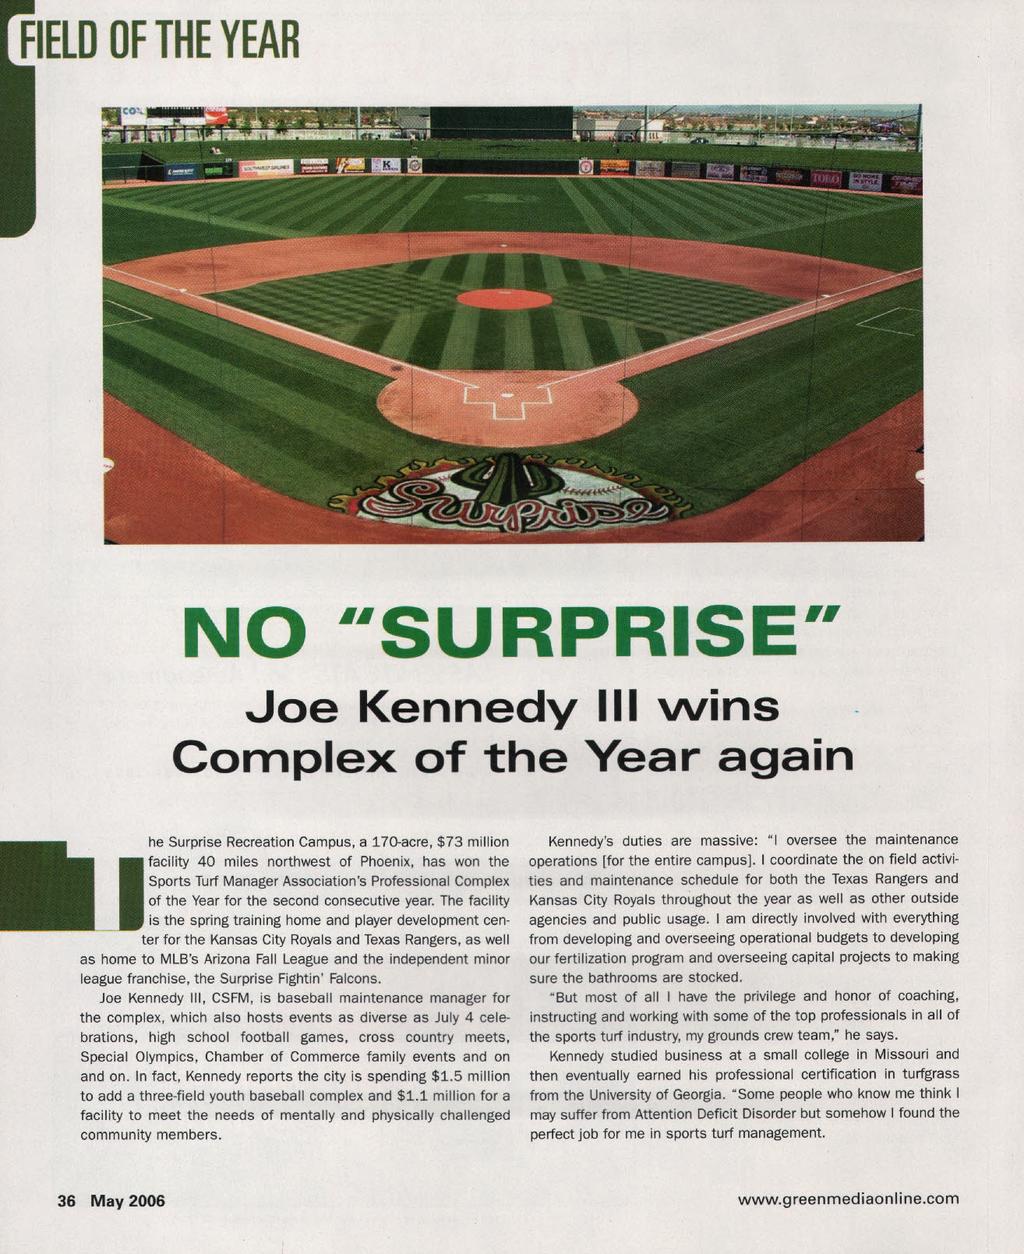 FIELD OF THE YEAR NO SURPRISE " Joe Kennedy III vvins Complex of the Year again he Surprise Recreation Campus, a 17o-acre, $73 million Ifacility 40 miles northwest of Phoenix,has won the Sports Turf